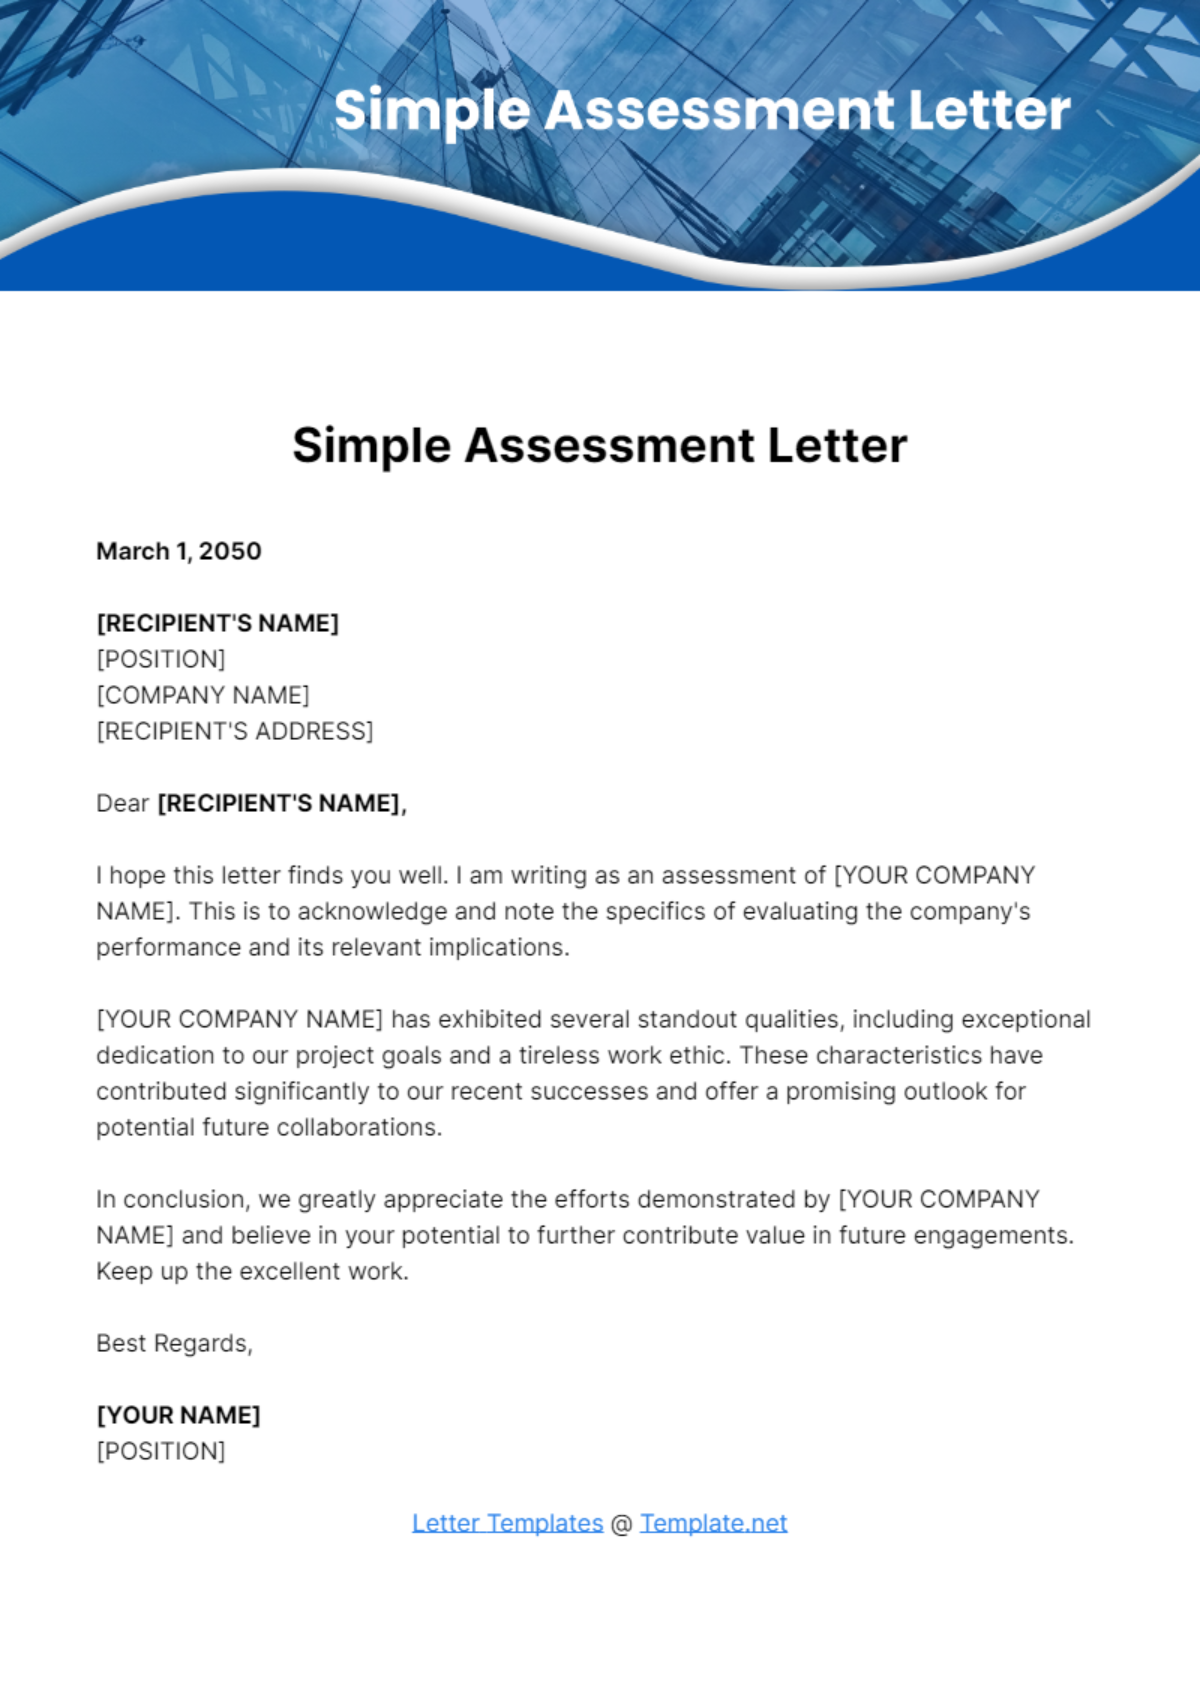 Free Simple Assessment Letter Template